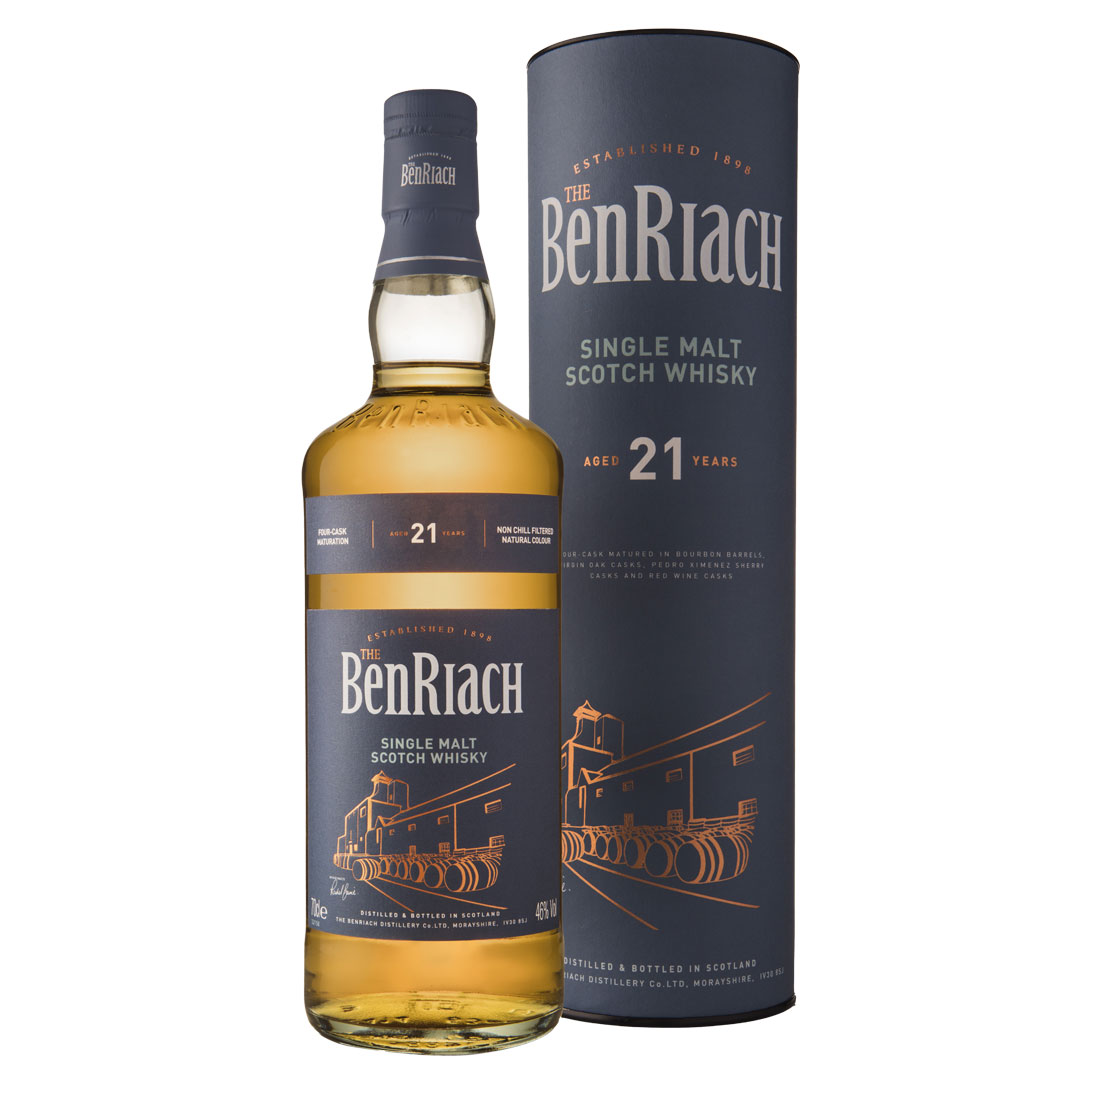 LB_Bottle-Benriach---Aged-21-Years